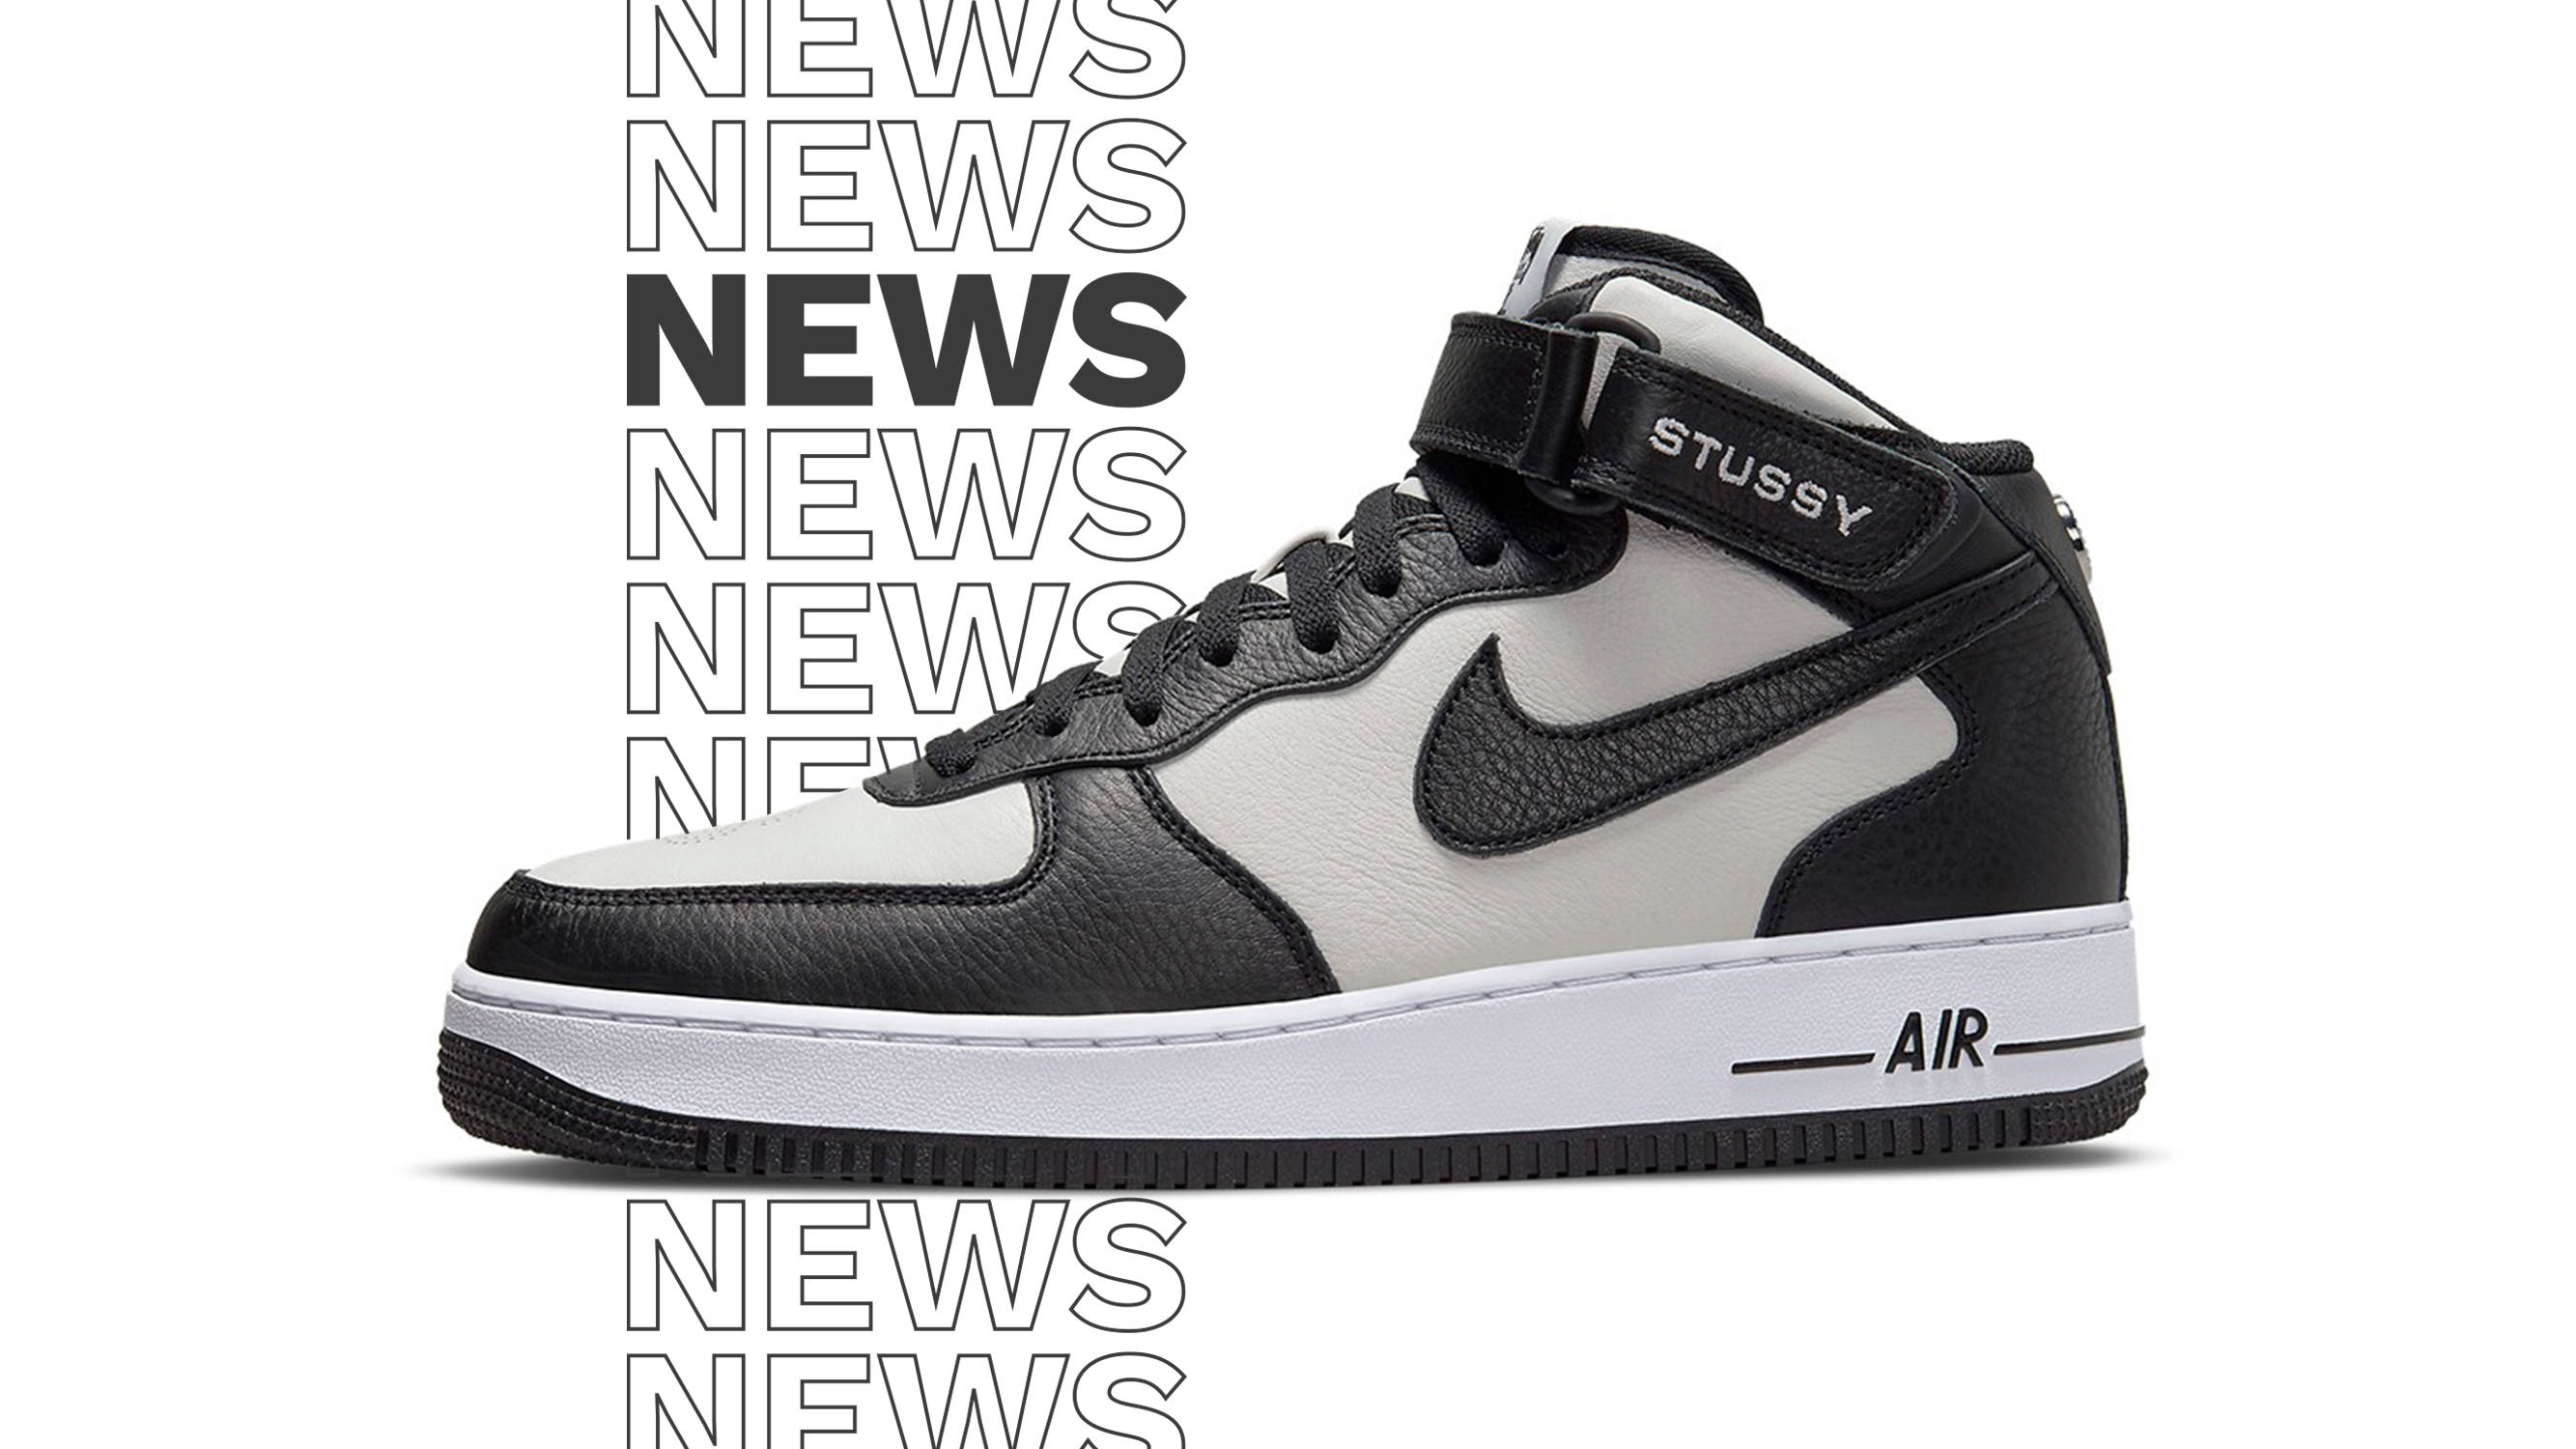 Official Images of the Stüssy x Nike Air Force 1 Mid Collaboration 